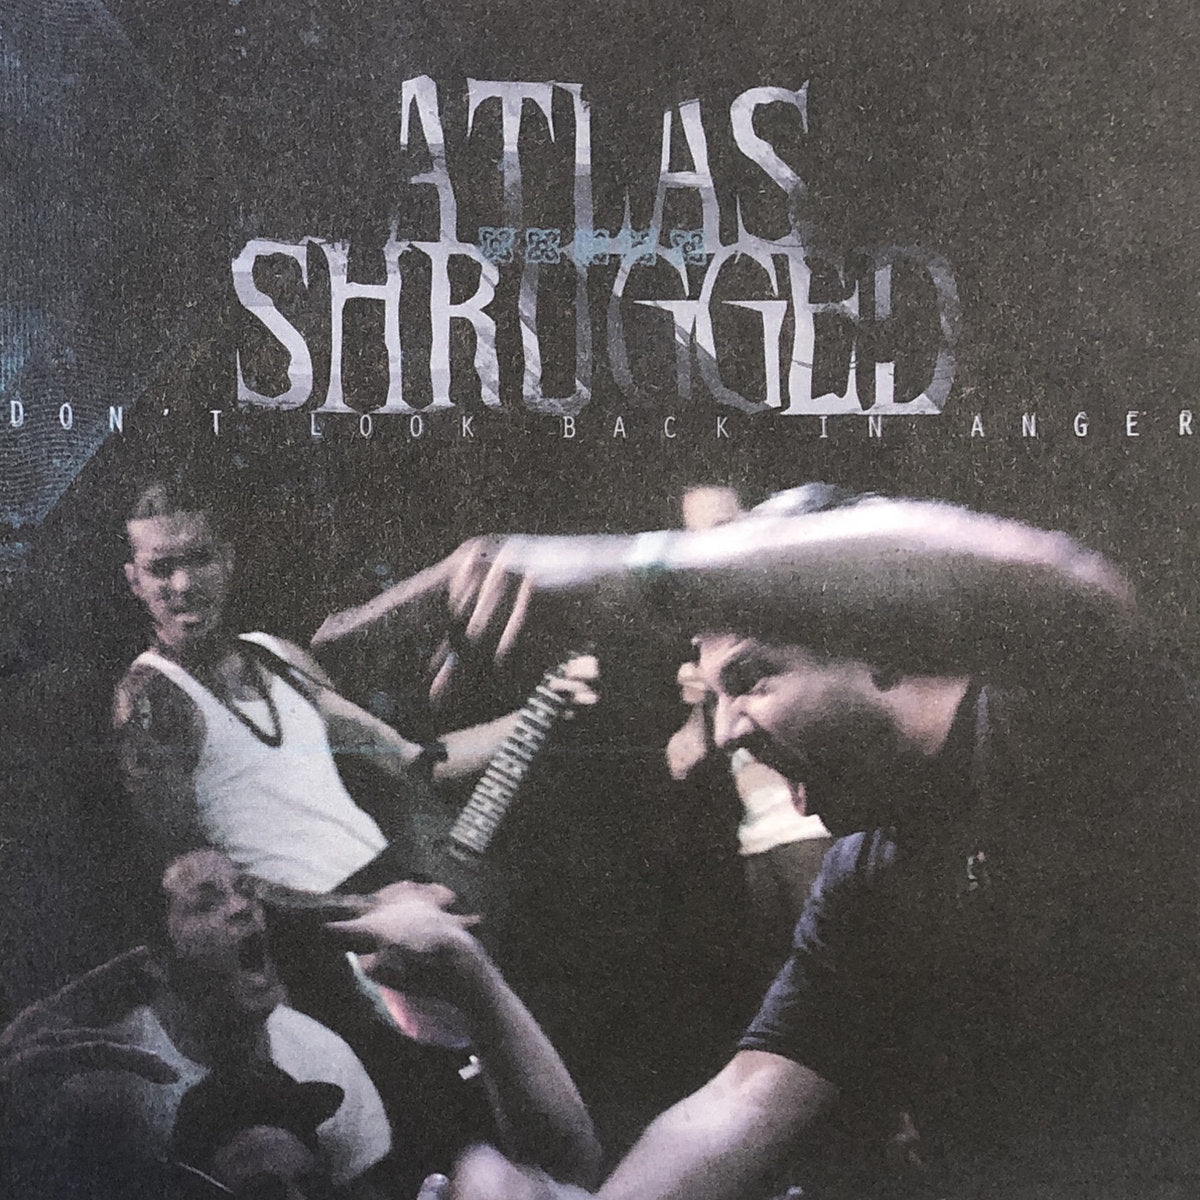 Atlas Shurgged "Don't Look Back In Anger" CD